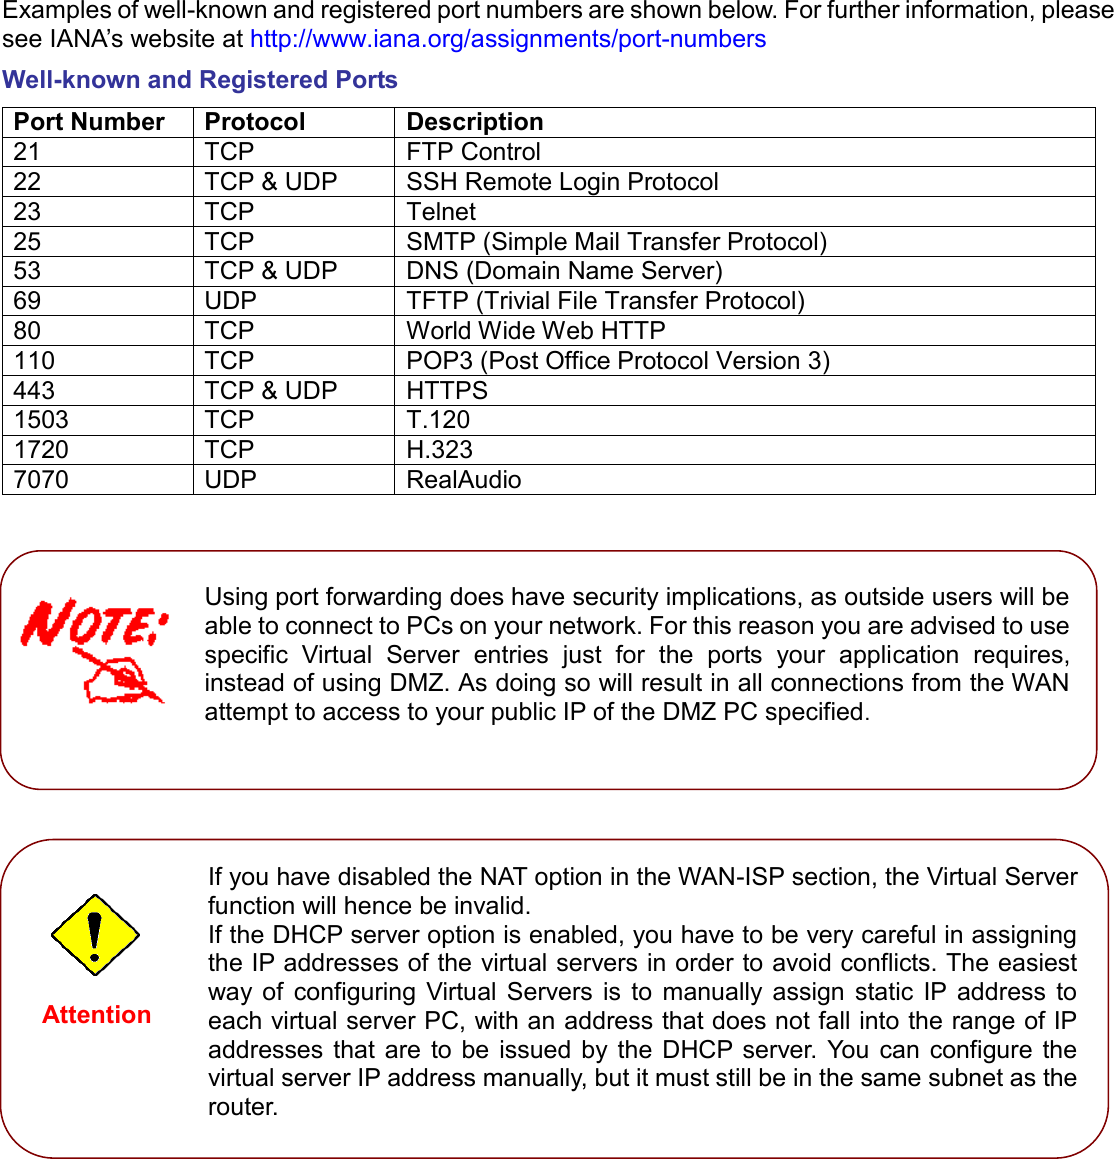    Examples of well-known and registered port numbers are shown below. For further information, please see IANA’s website at http://www.iana.org/assignments/port-numbers Well-known and Registered Ports Port Number Protocol Description 21 TCP FTP Control 22 TCP &amp; UDP SSH Remote Login Protocol 23 TCP Telnet 25 TCP SMTP (Simple Mail Transfer Protocol) 53 TCP &amp; UDP DNS (Domain Name Server) 69 UDP TFTP (Trivial File Transfer Protocol) 80 TCP World Wide Web HTTP 110 TCP POP3 (Post Office Protocol Version 3) 443 TCP &amp; UDP HTTPS 1503 TCP T.120 1720 TCP H.323 7070 UDP RealAudio            Using port forwarding does have security implications, as outside users will be able to connect to PCs on your network. For this reason you are advised to use specific  Virtual  Server  entries  just  for  the  ports  your  application  requires, instead of using DMZ. As doing so will result in all connections from the WAN attempt to access to your public IP of the DMZ PC specified.   If you have disabled the NAT option in the WAN-ISP section, the Virtual Server function will hence be invalid. If the DHCP server option is enabled, you have to be very careful in assigning the IP addresses of the virtual servers in order to avoid conflicts. The easiest way  of  configuring  Virtual  Servers  is  to  manually  assign  static  IP address  to each virtual server PC, with an address that does not fall into the range of IP addresses  that are  to be  issued by the  DHCP server.  You  can  configure  the virtual server IP address manually, but it must still be in the same subnet as the router.   Attention 